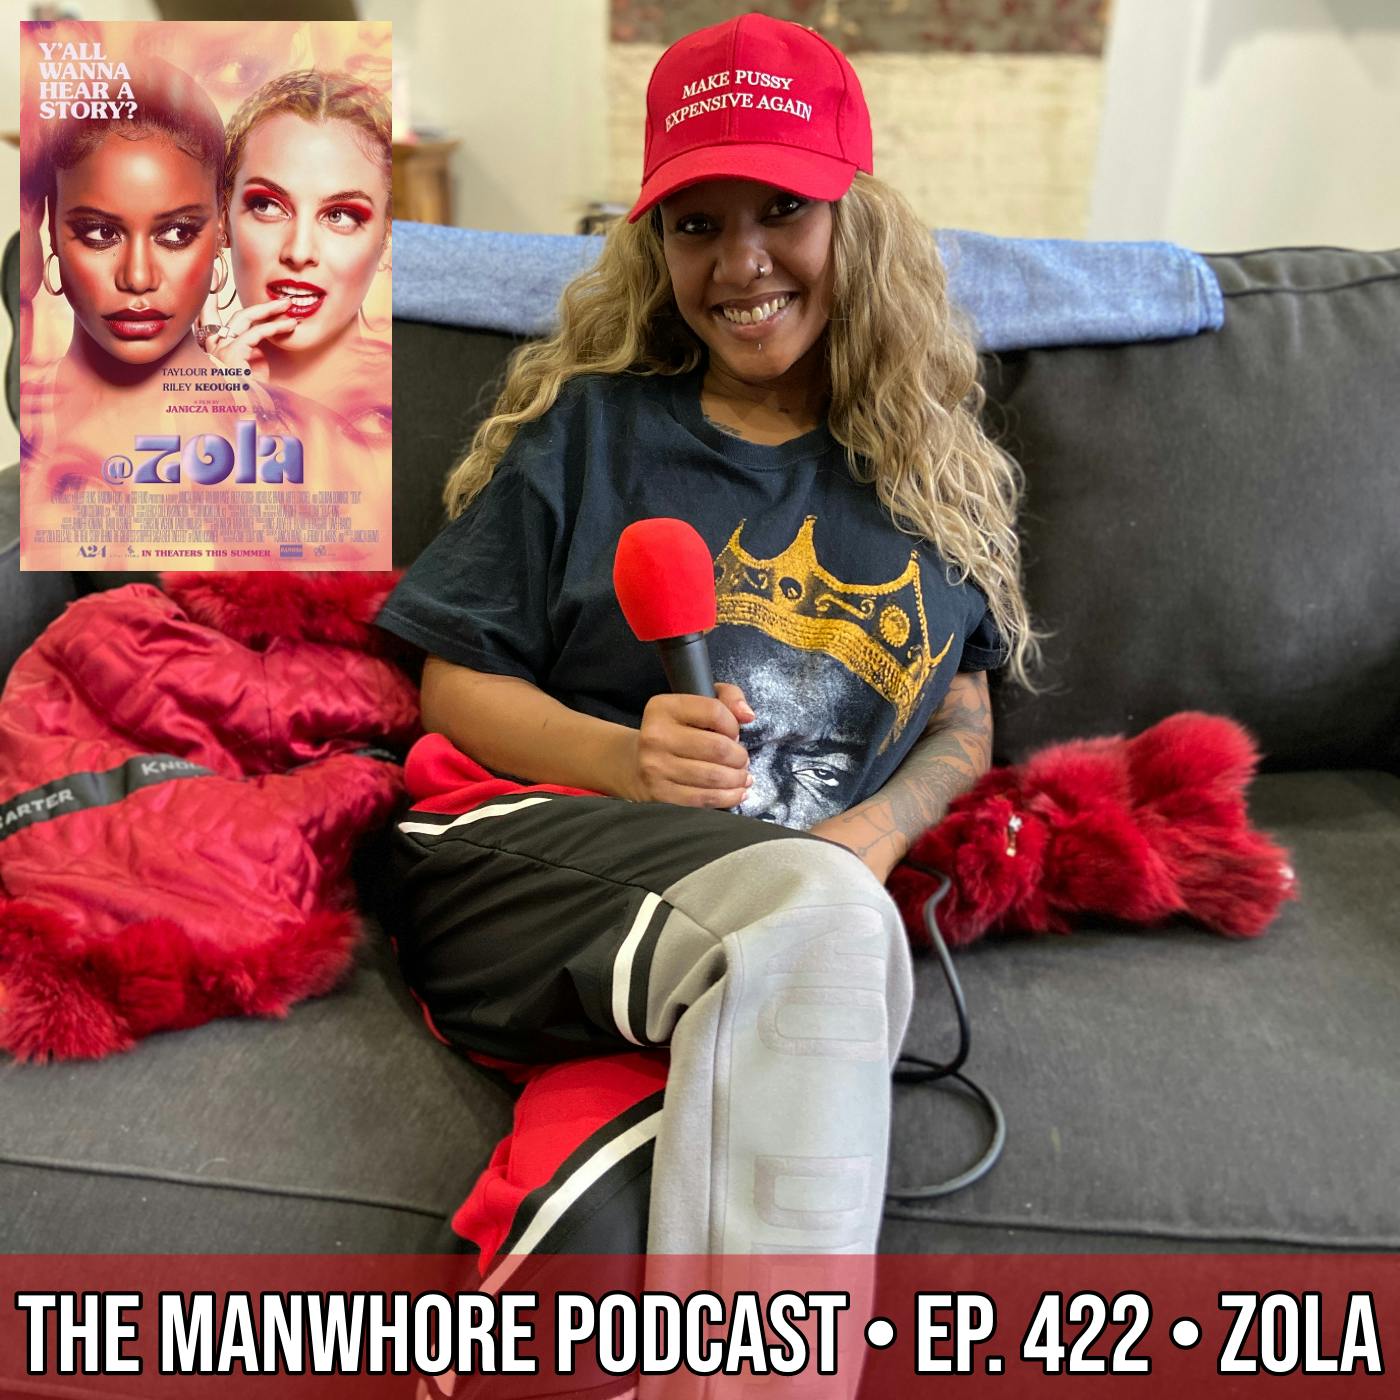 The Zola Thotyssey: Wild Sex Work Stories from the Strip Club (Ep. 422)